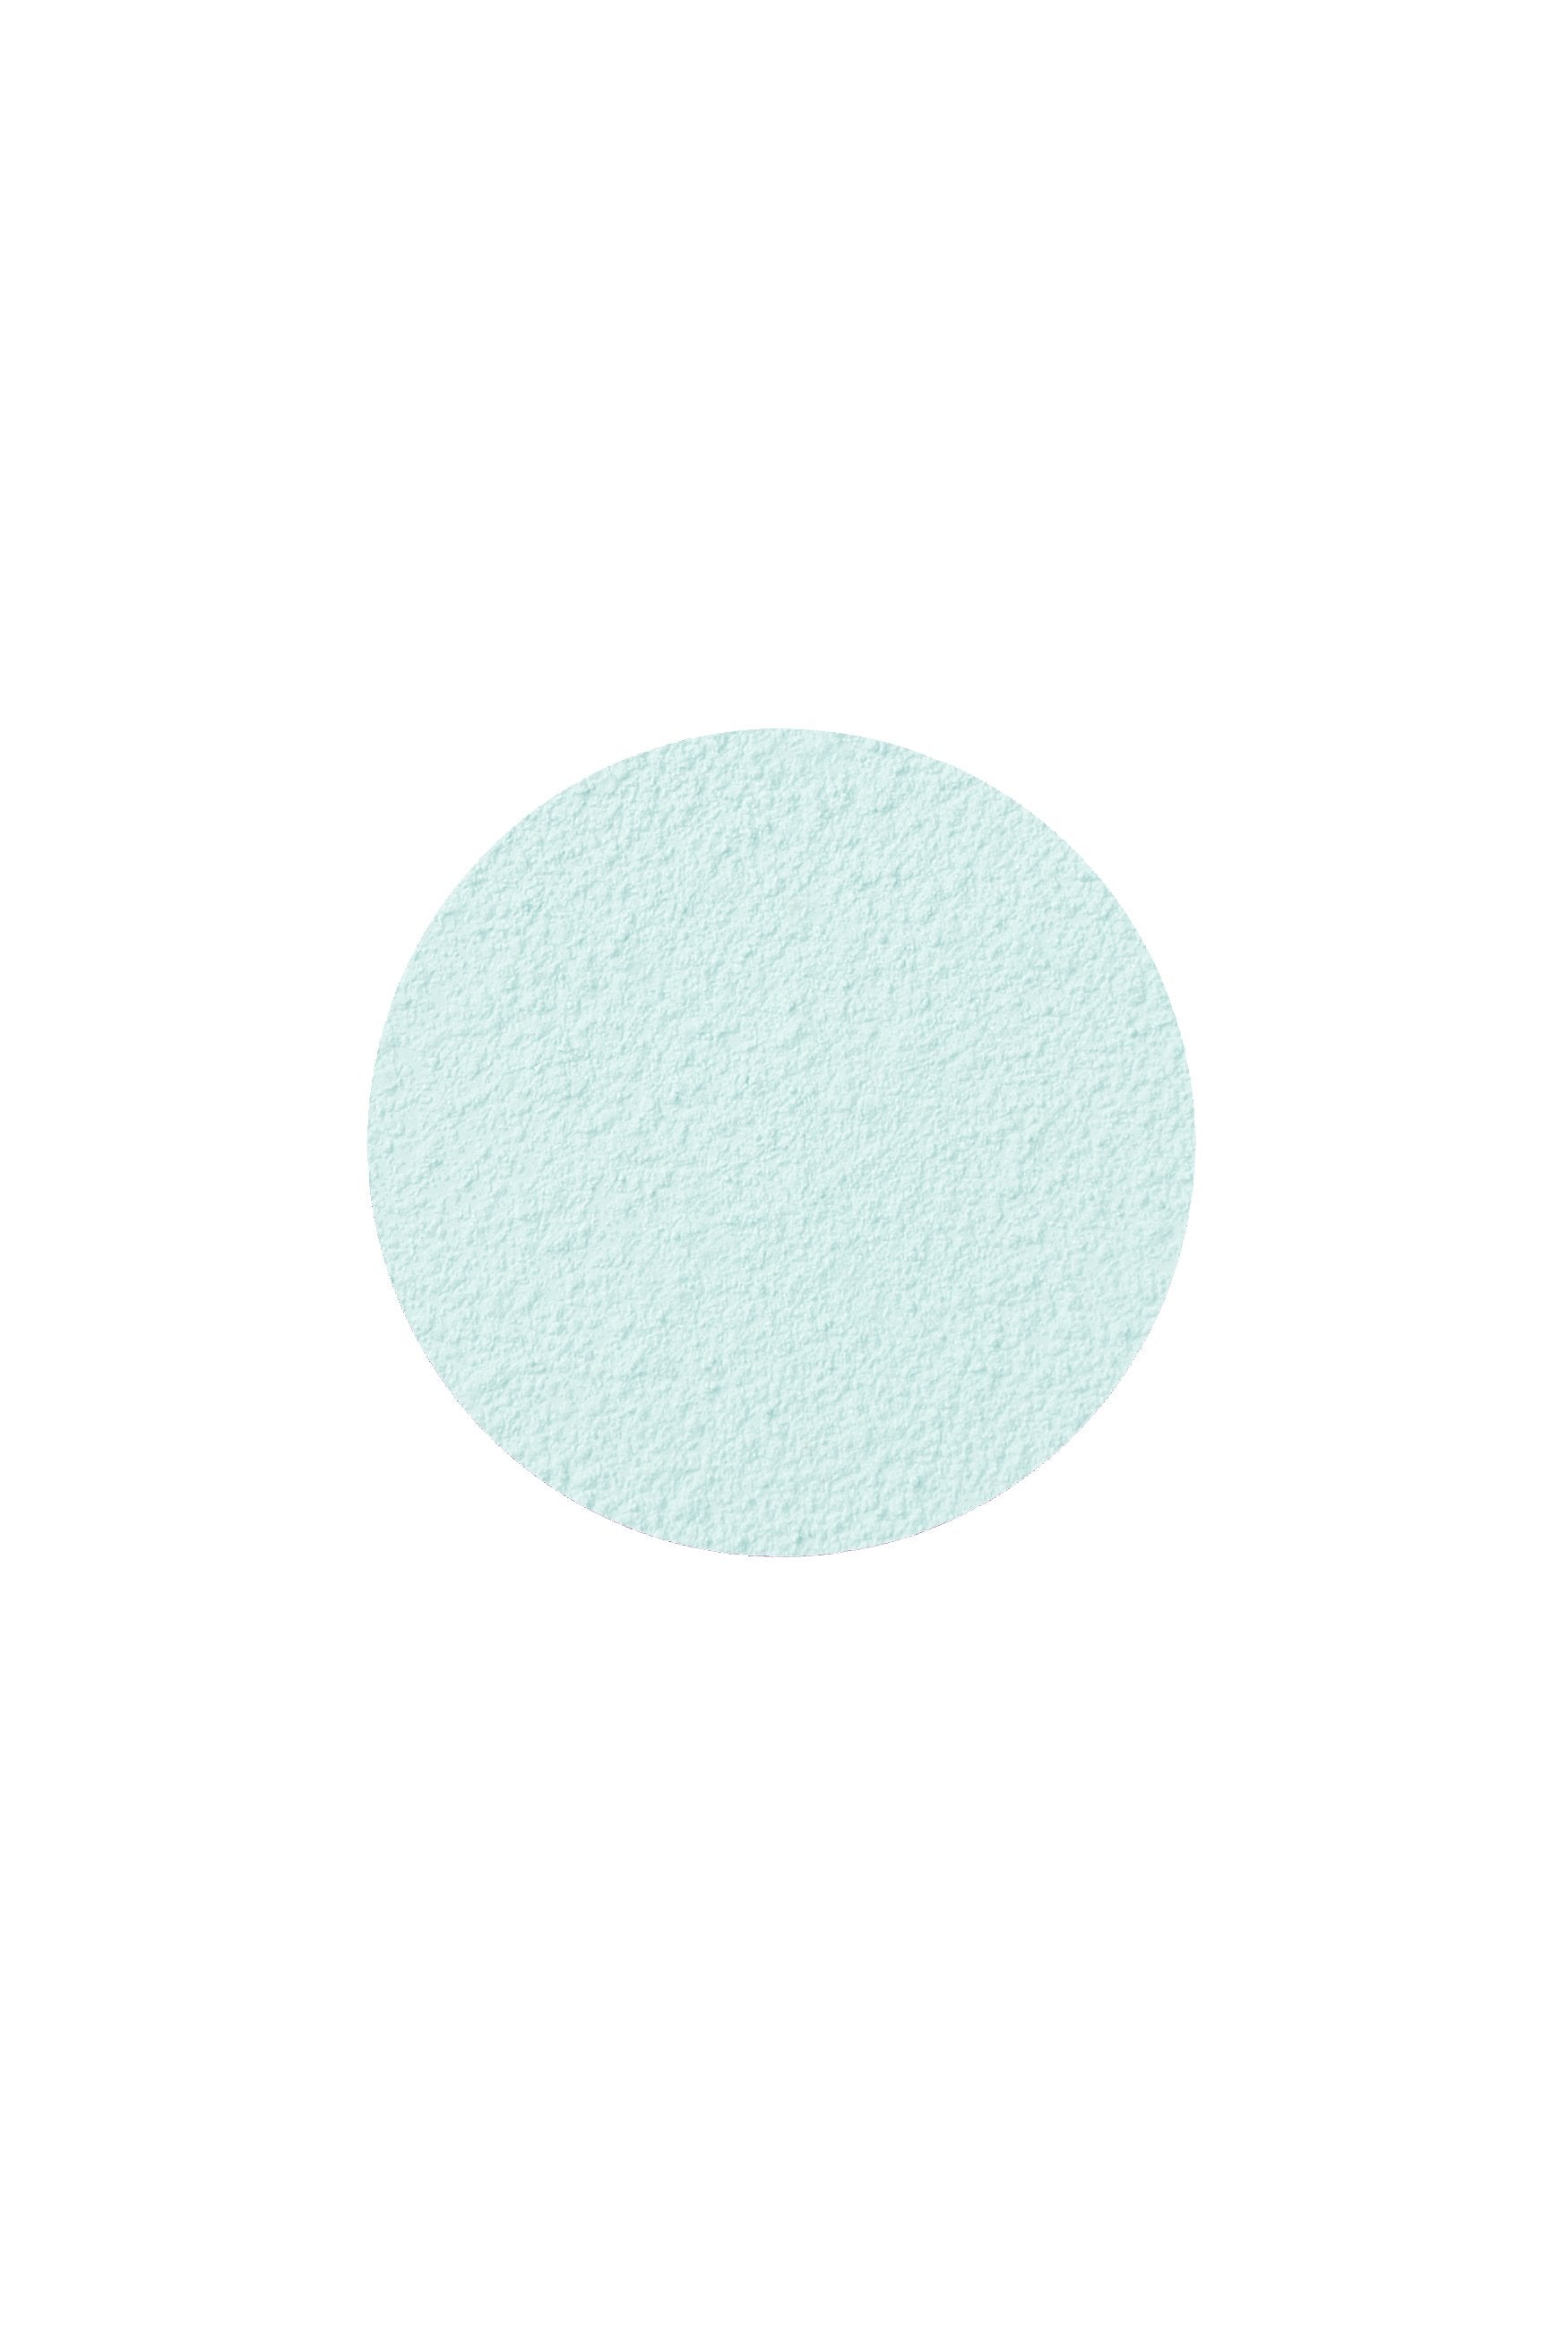 Loose Powder (Large Refill) SILVER PEARL, corrects redness to make skin look more translucent